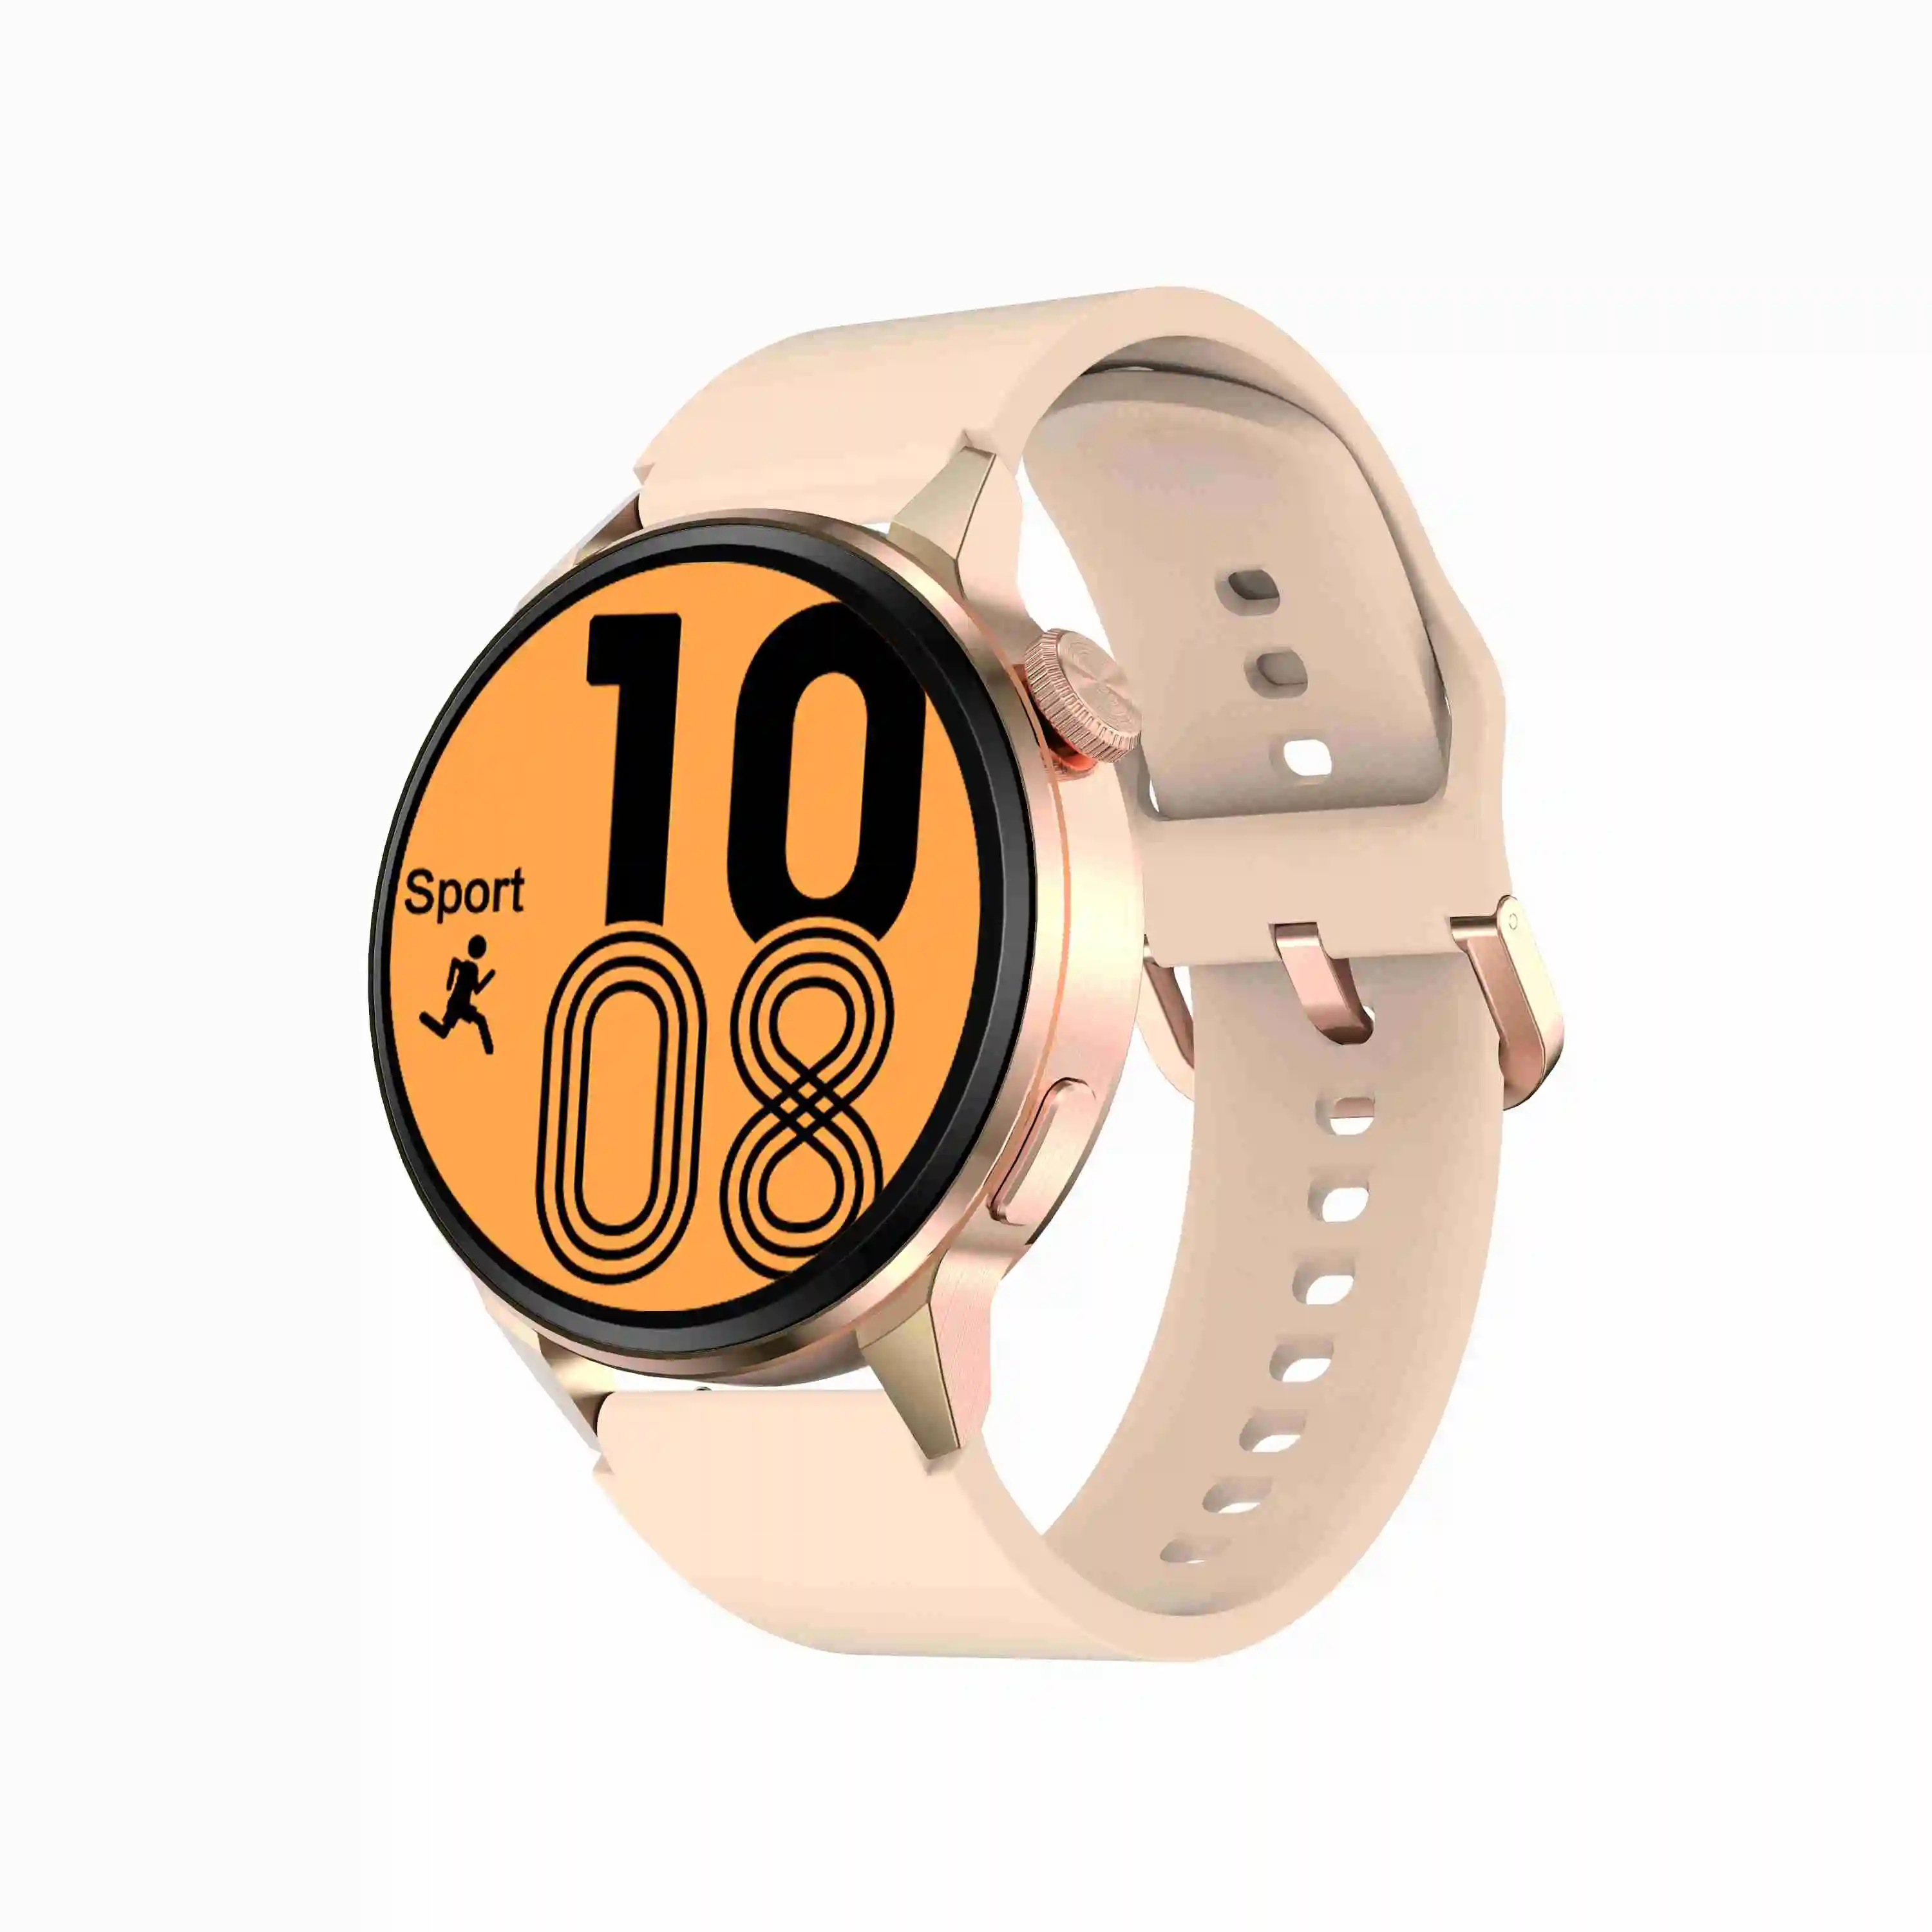 DT4 Plus IOS Android Smart Round Screen with NFC Blowout Smartwatch 280mAh Watch Bracelet From m.alibaba.com